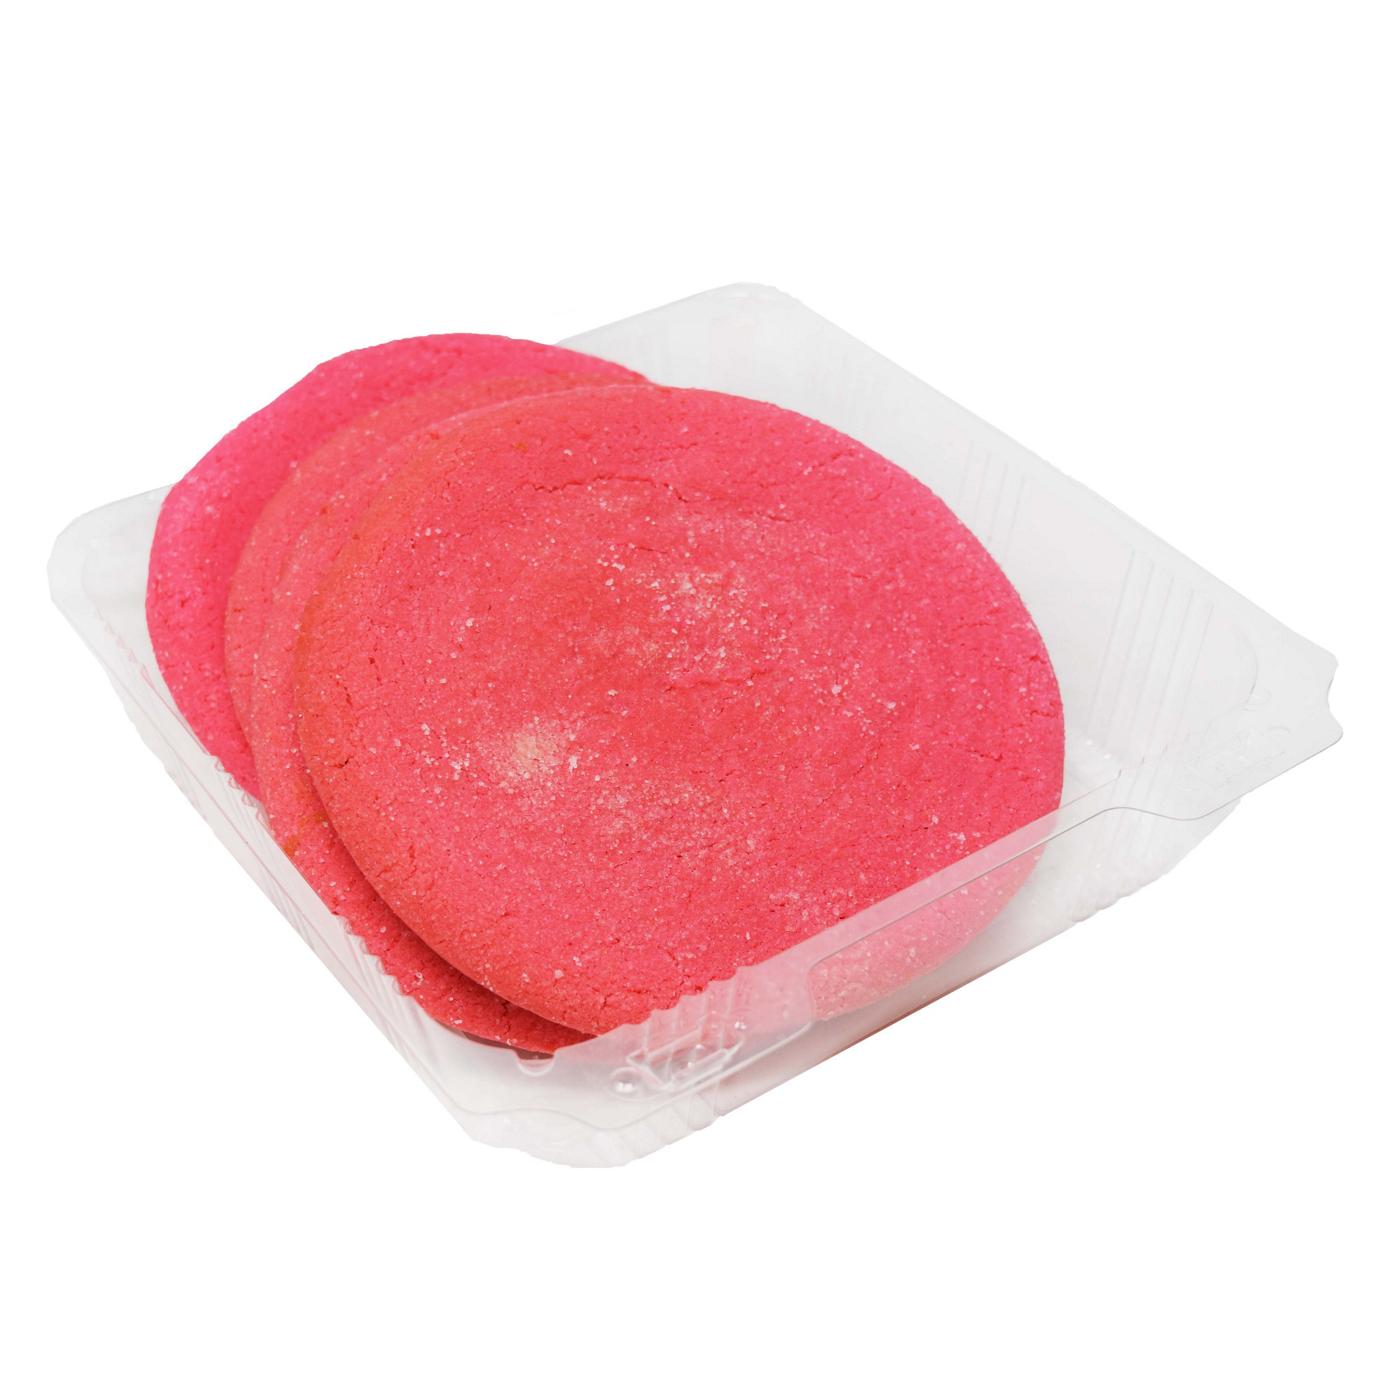 H-E-B Bakery Large Polvoron Cookies - Pink; image 1 of 3